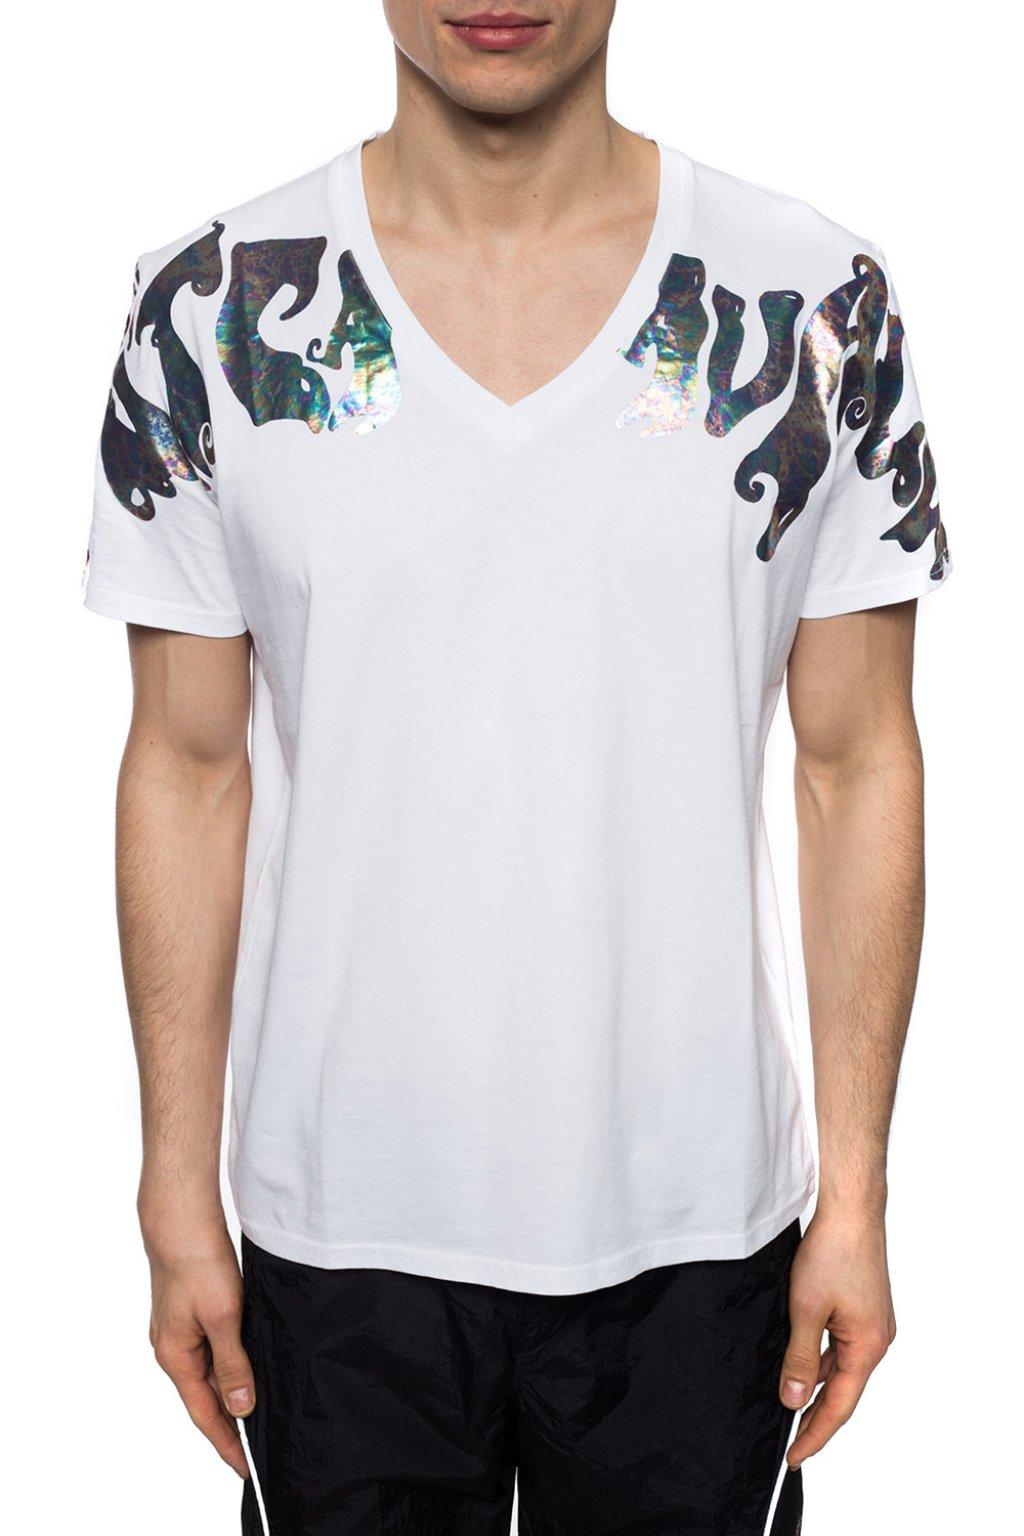 Just Cavalli Cotton Printed T-shirt White for Men - Lyst